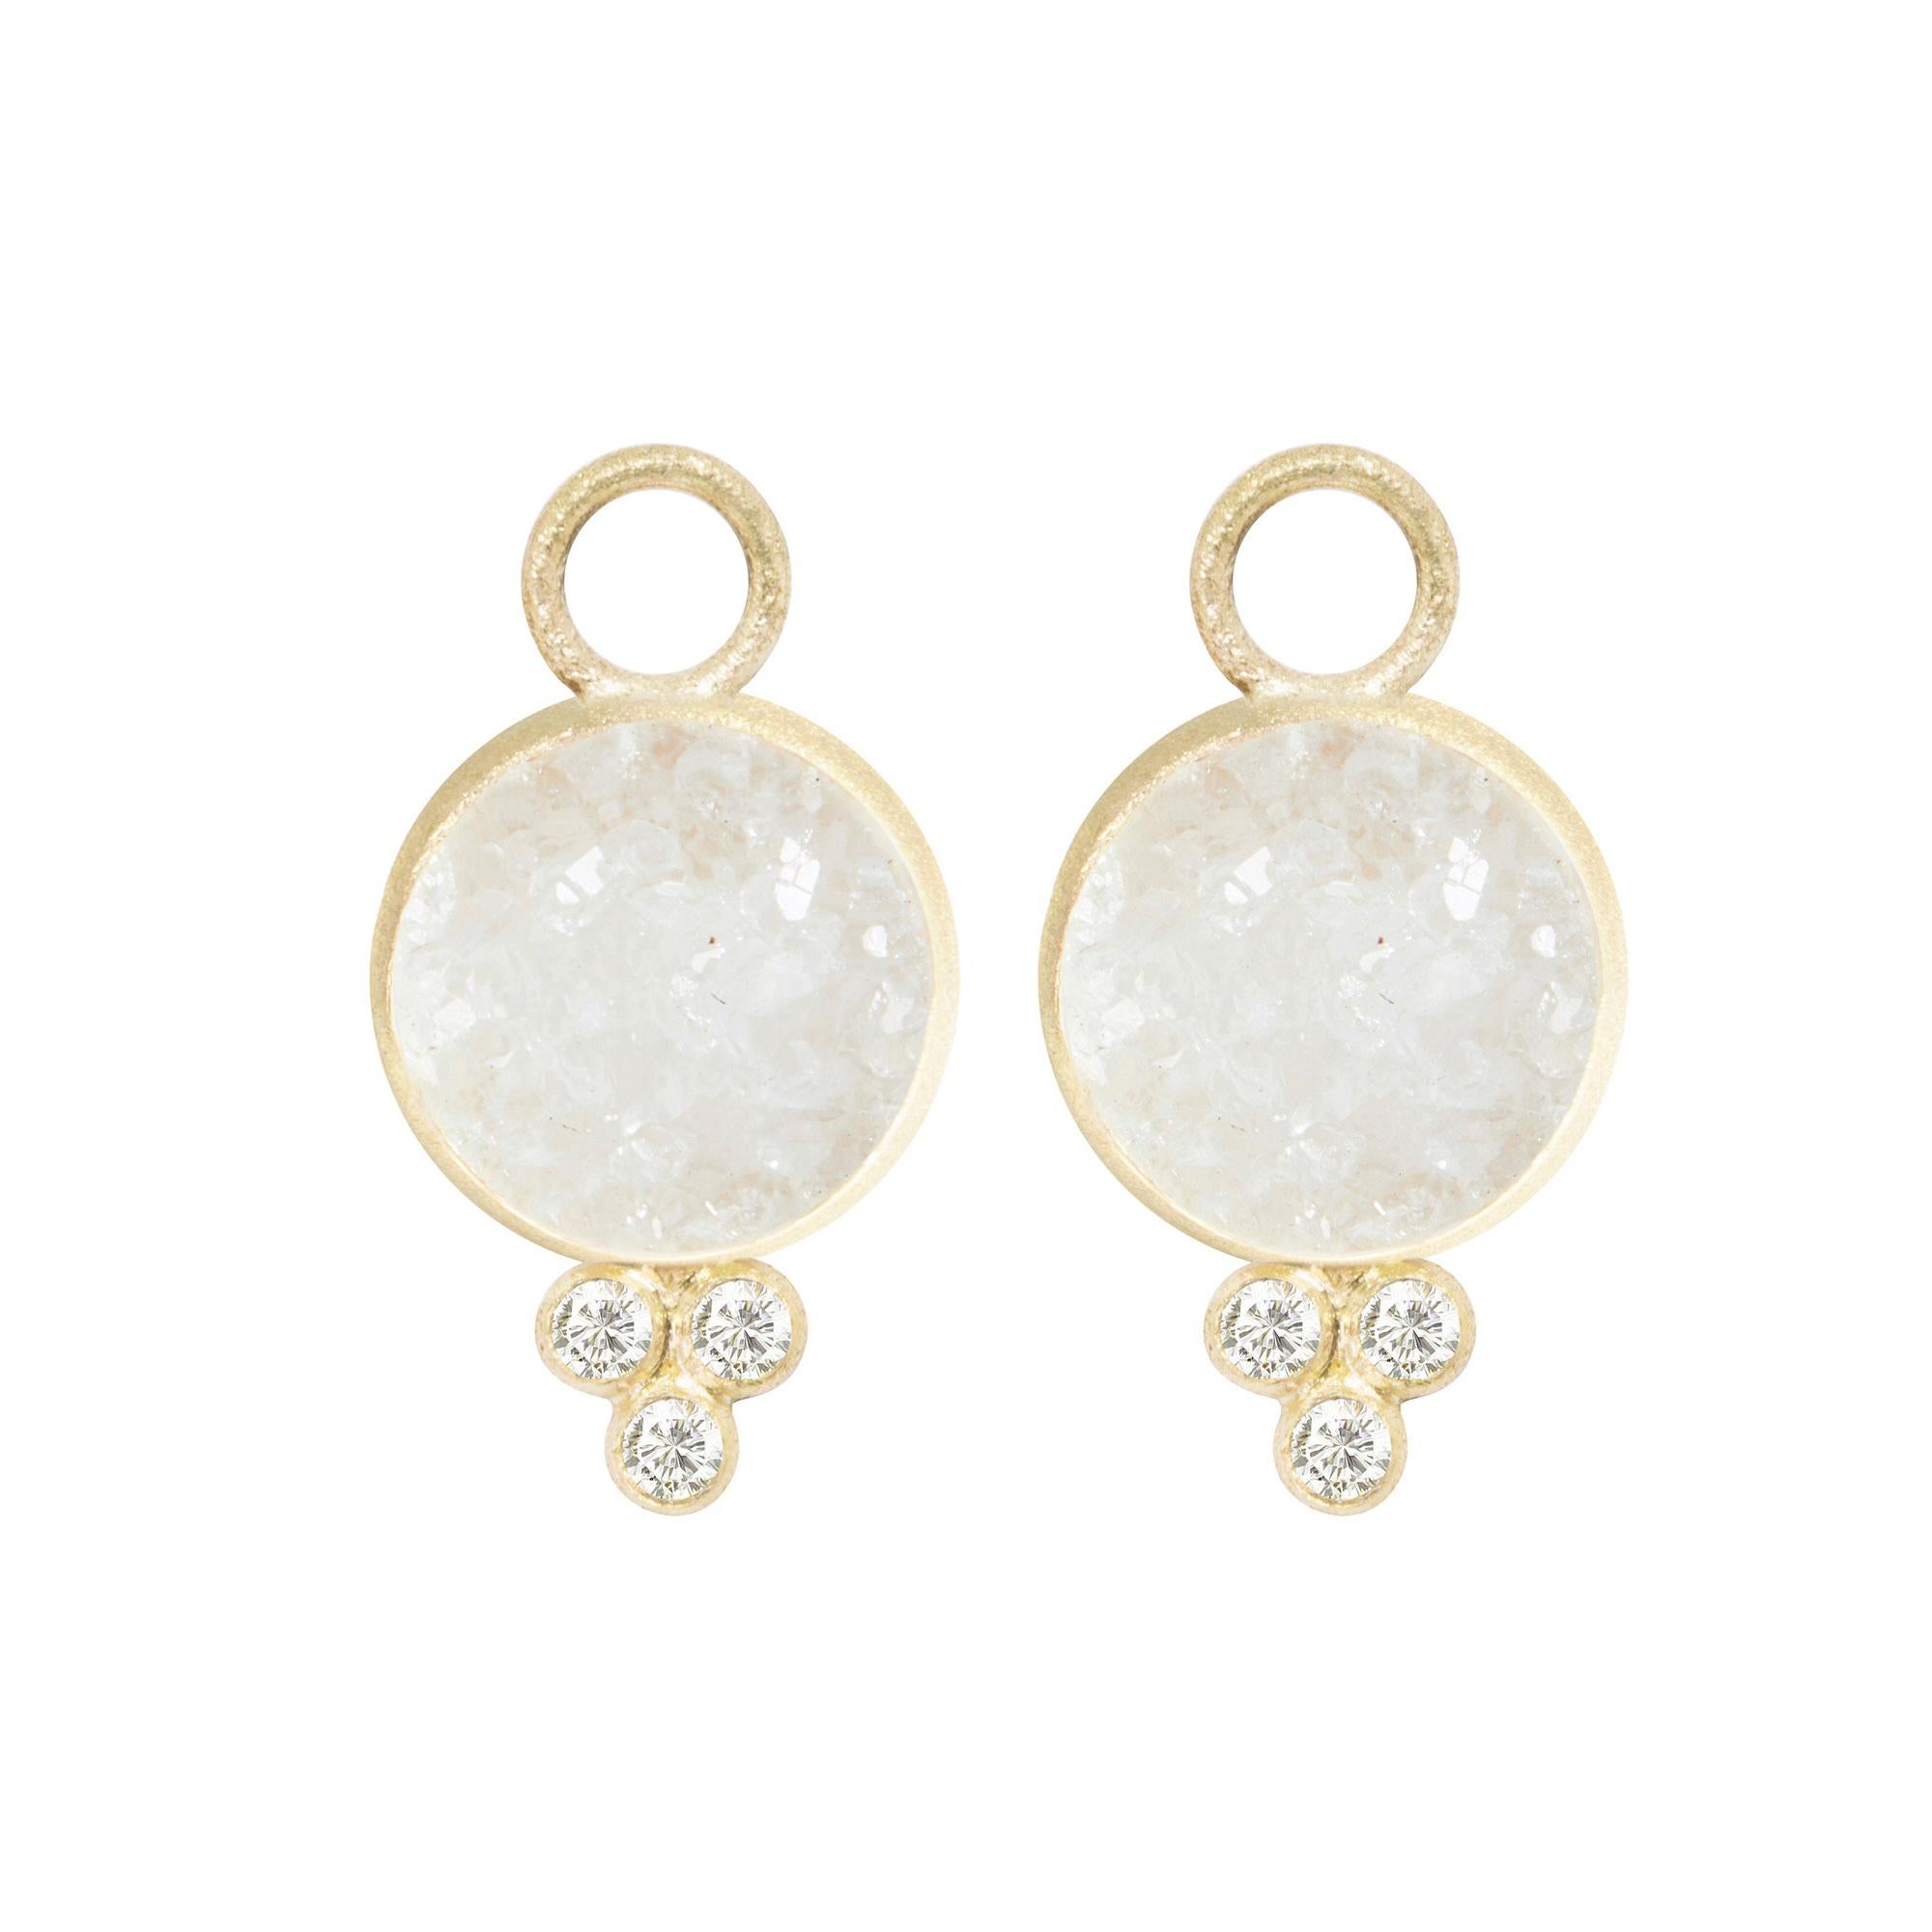 Contemporary Chloe White Druzy Charms and Intricate 18 Karat Gold Reversible Huggies Earrings For Sale